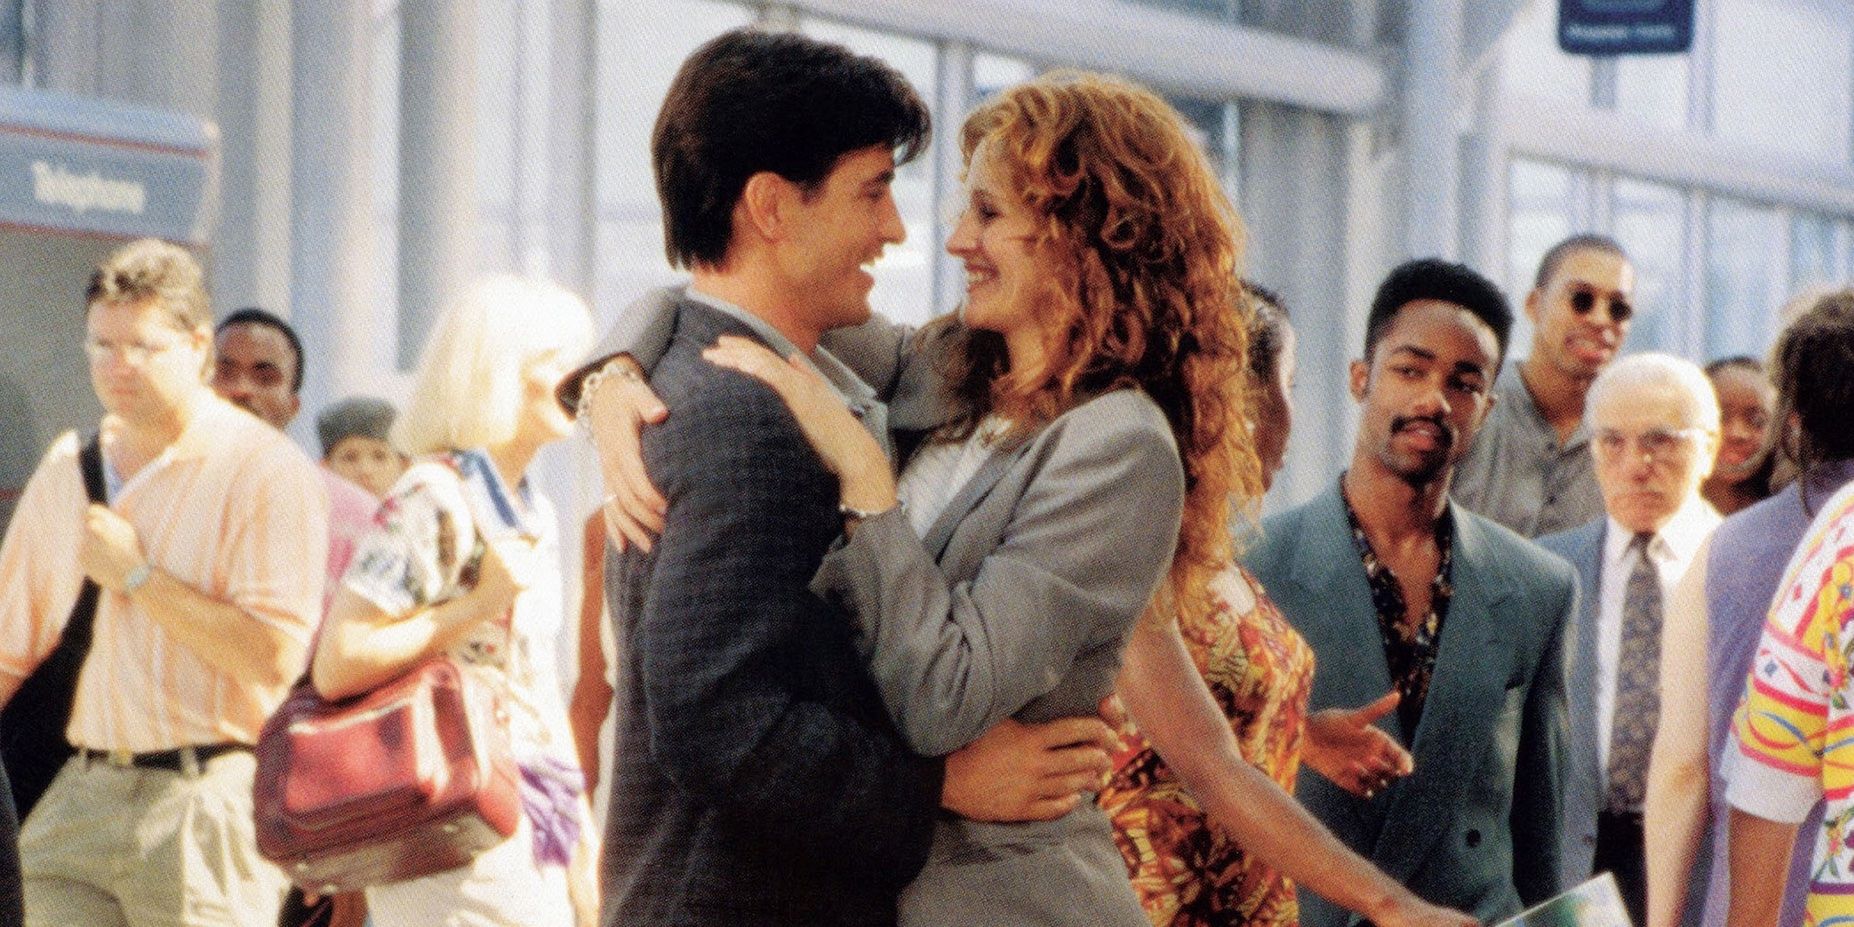 Julia Roberts and Dermont Mulroney as Julianne and Michael embracing at an airport in 'My Best Friend's Wedding'